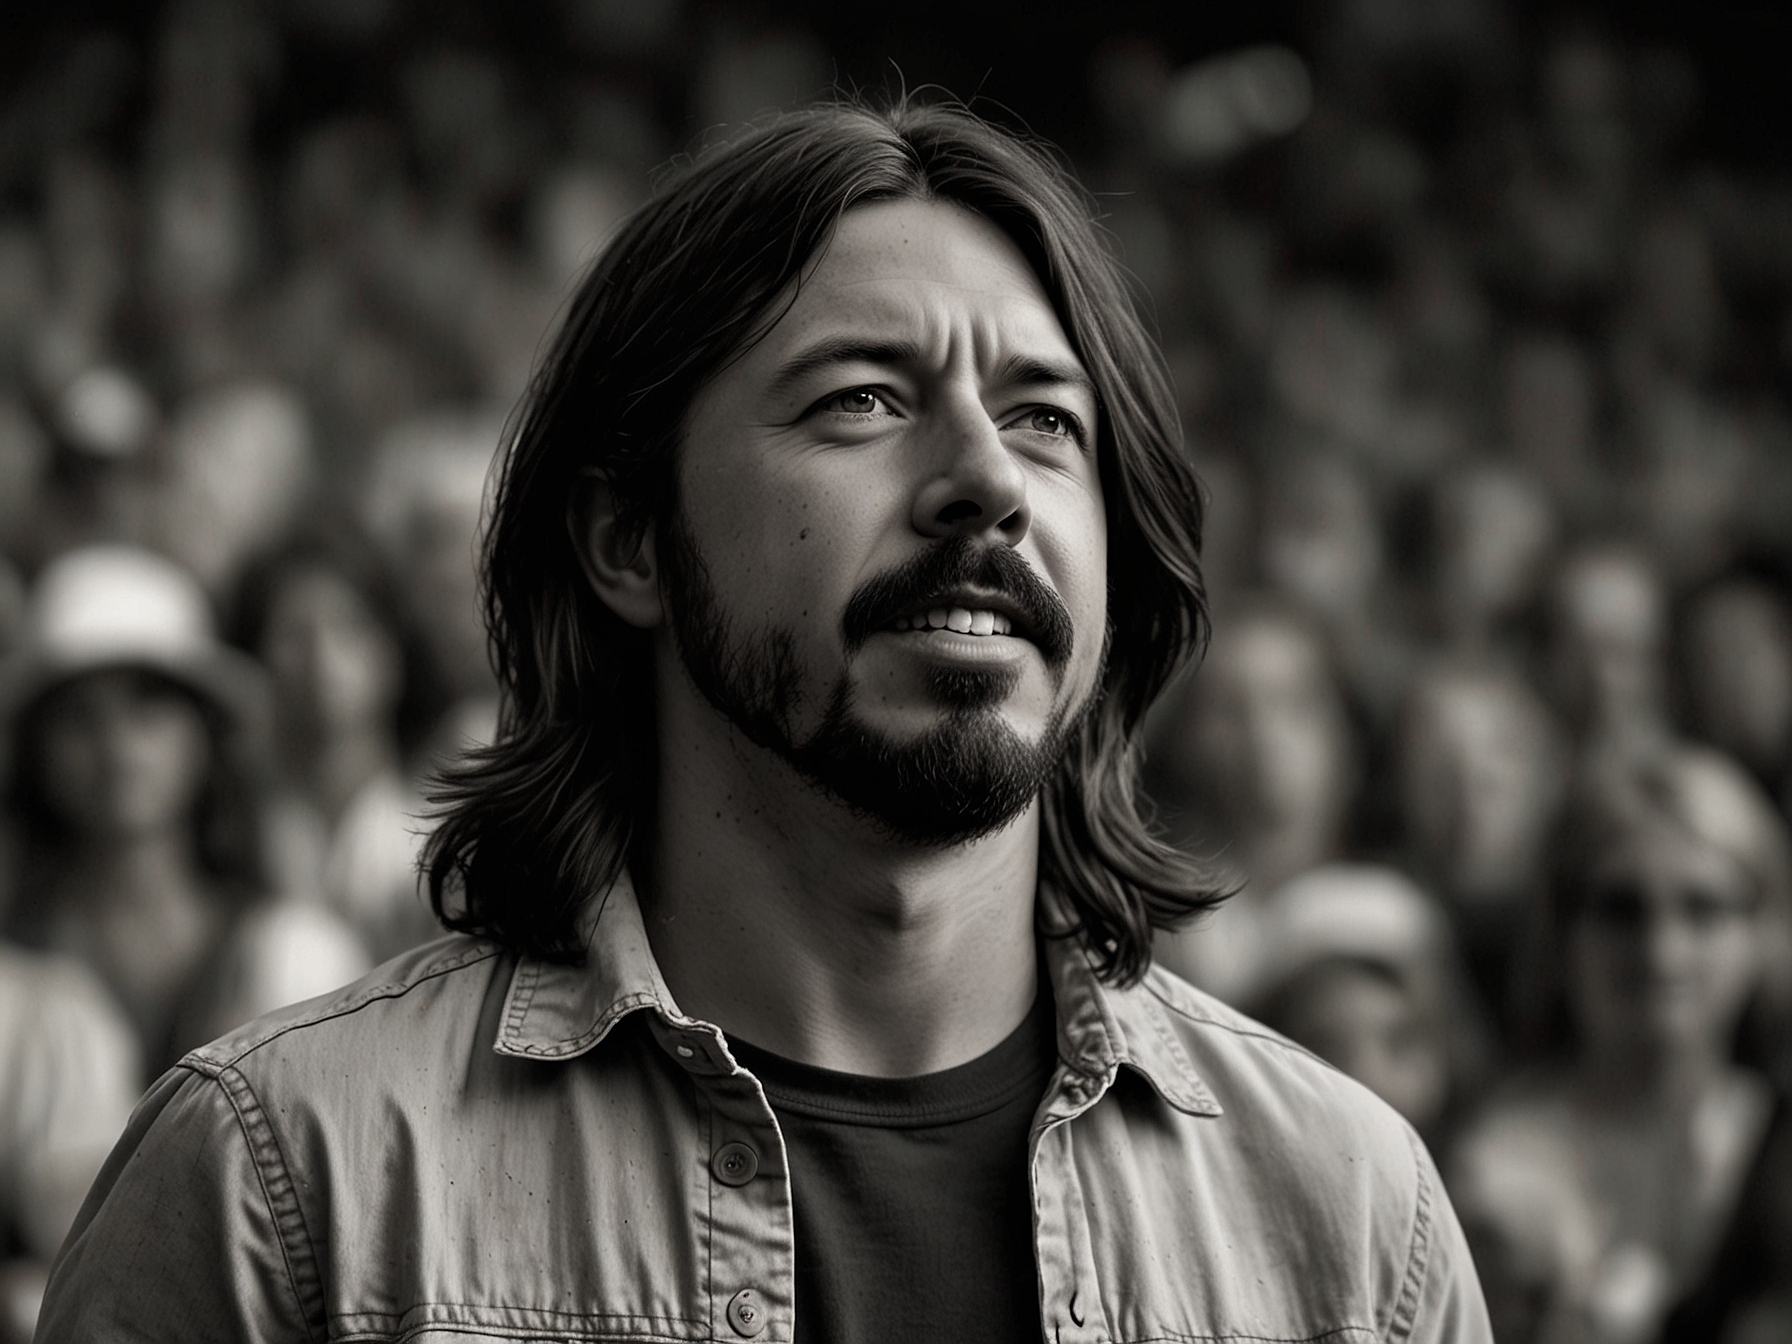 Dave Grohl, in casual yet stylish attire, engages with the crowd at Wimbledon, blending in while being recognized by keen-eyed fans. His friendly demeanor was a highlight for many attendees.